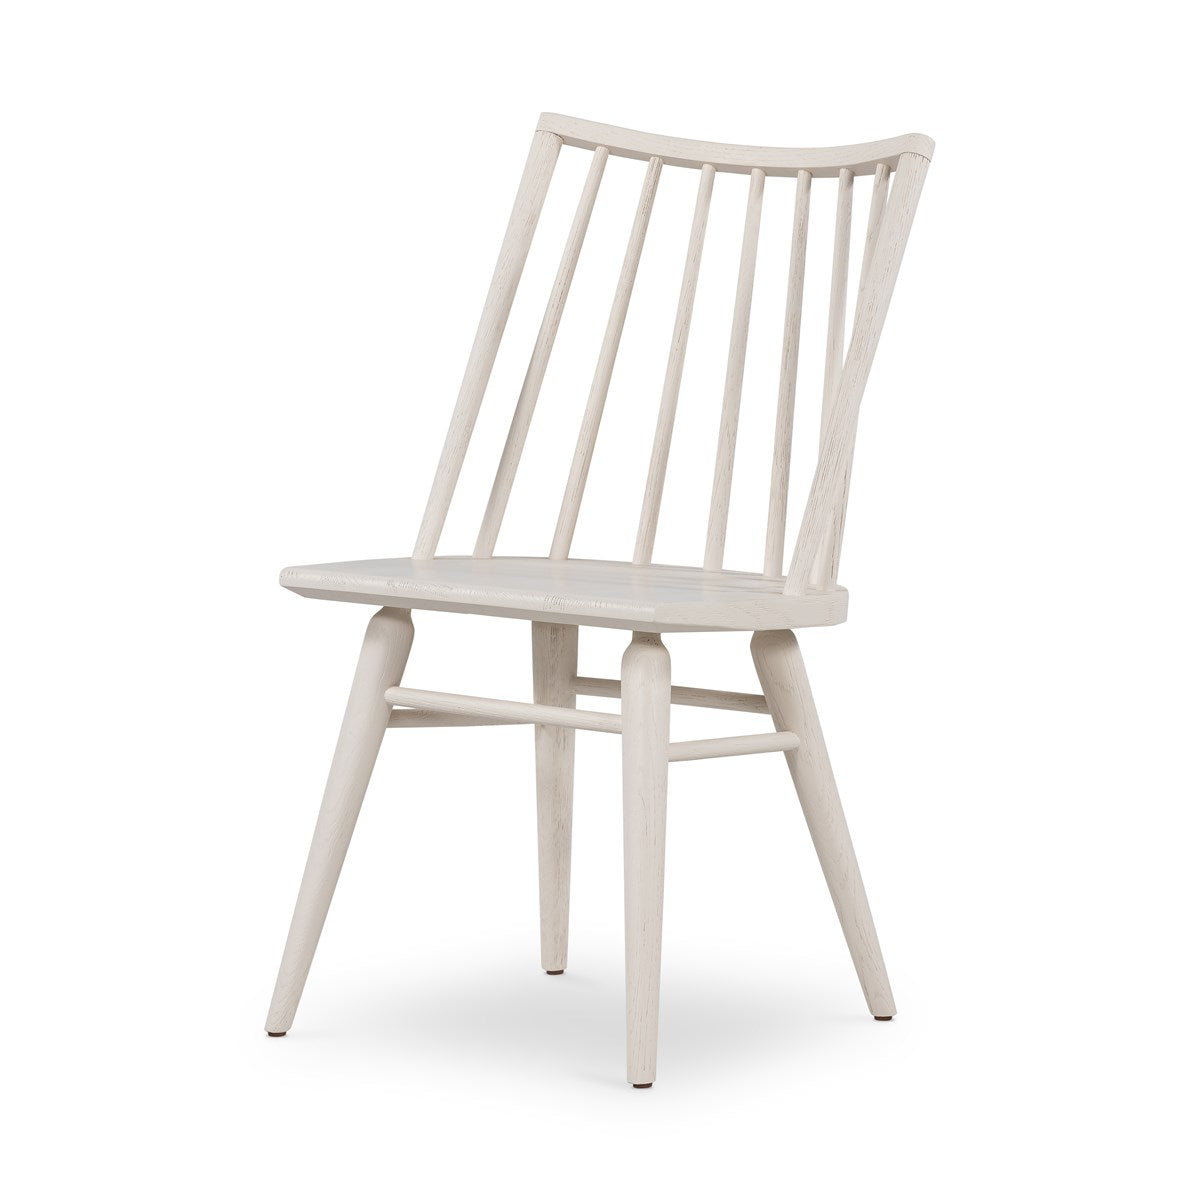 Lewis Windsor Chair Off WhiteChair Four Hands  Off White   Four Hands, Burke Decor, Mid Century Modern Furniture, Old Bones Furniture Company, Old Bones Co, Modern Mid Century, Designer Furniture, https://www.oldbonesco.com/